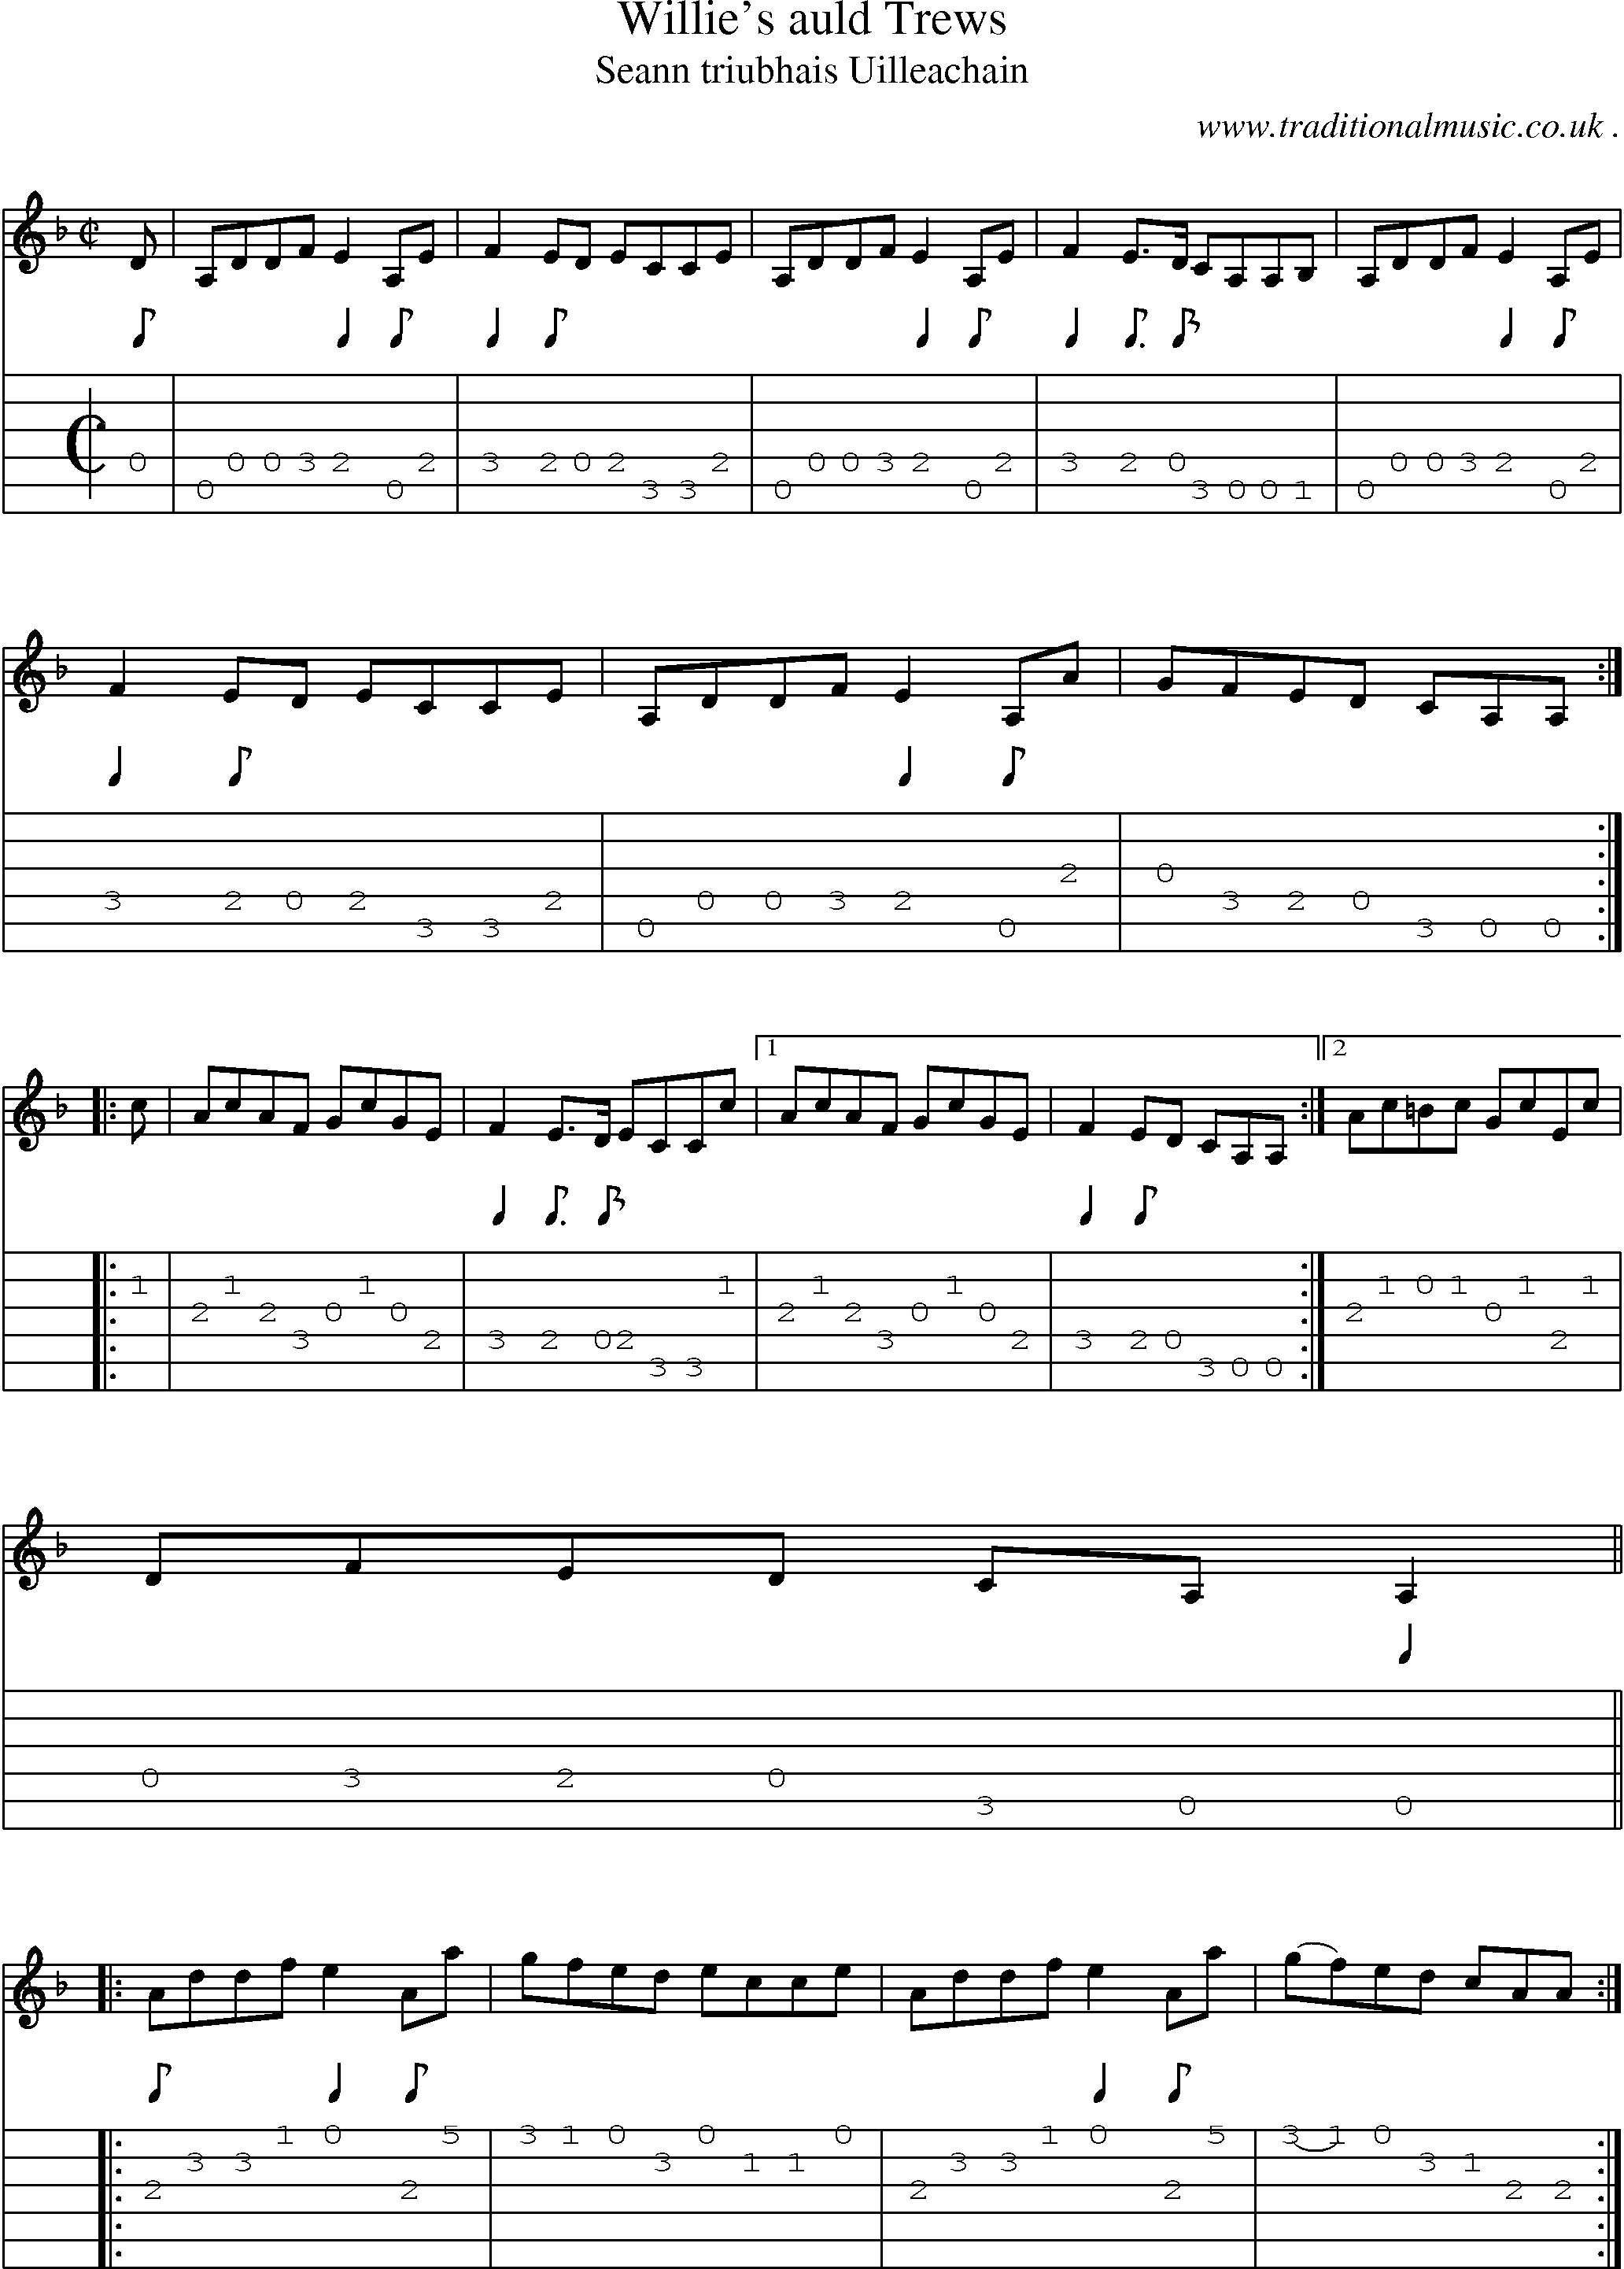 Sheet-music  score, Chords and Guitar Tabs for Willies Auld Trews